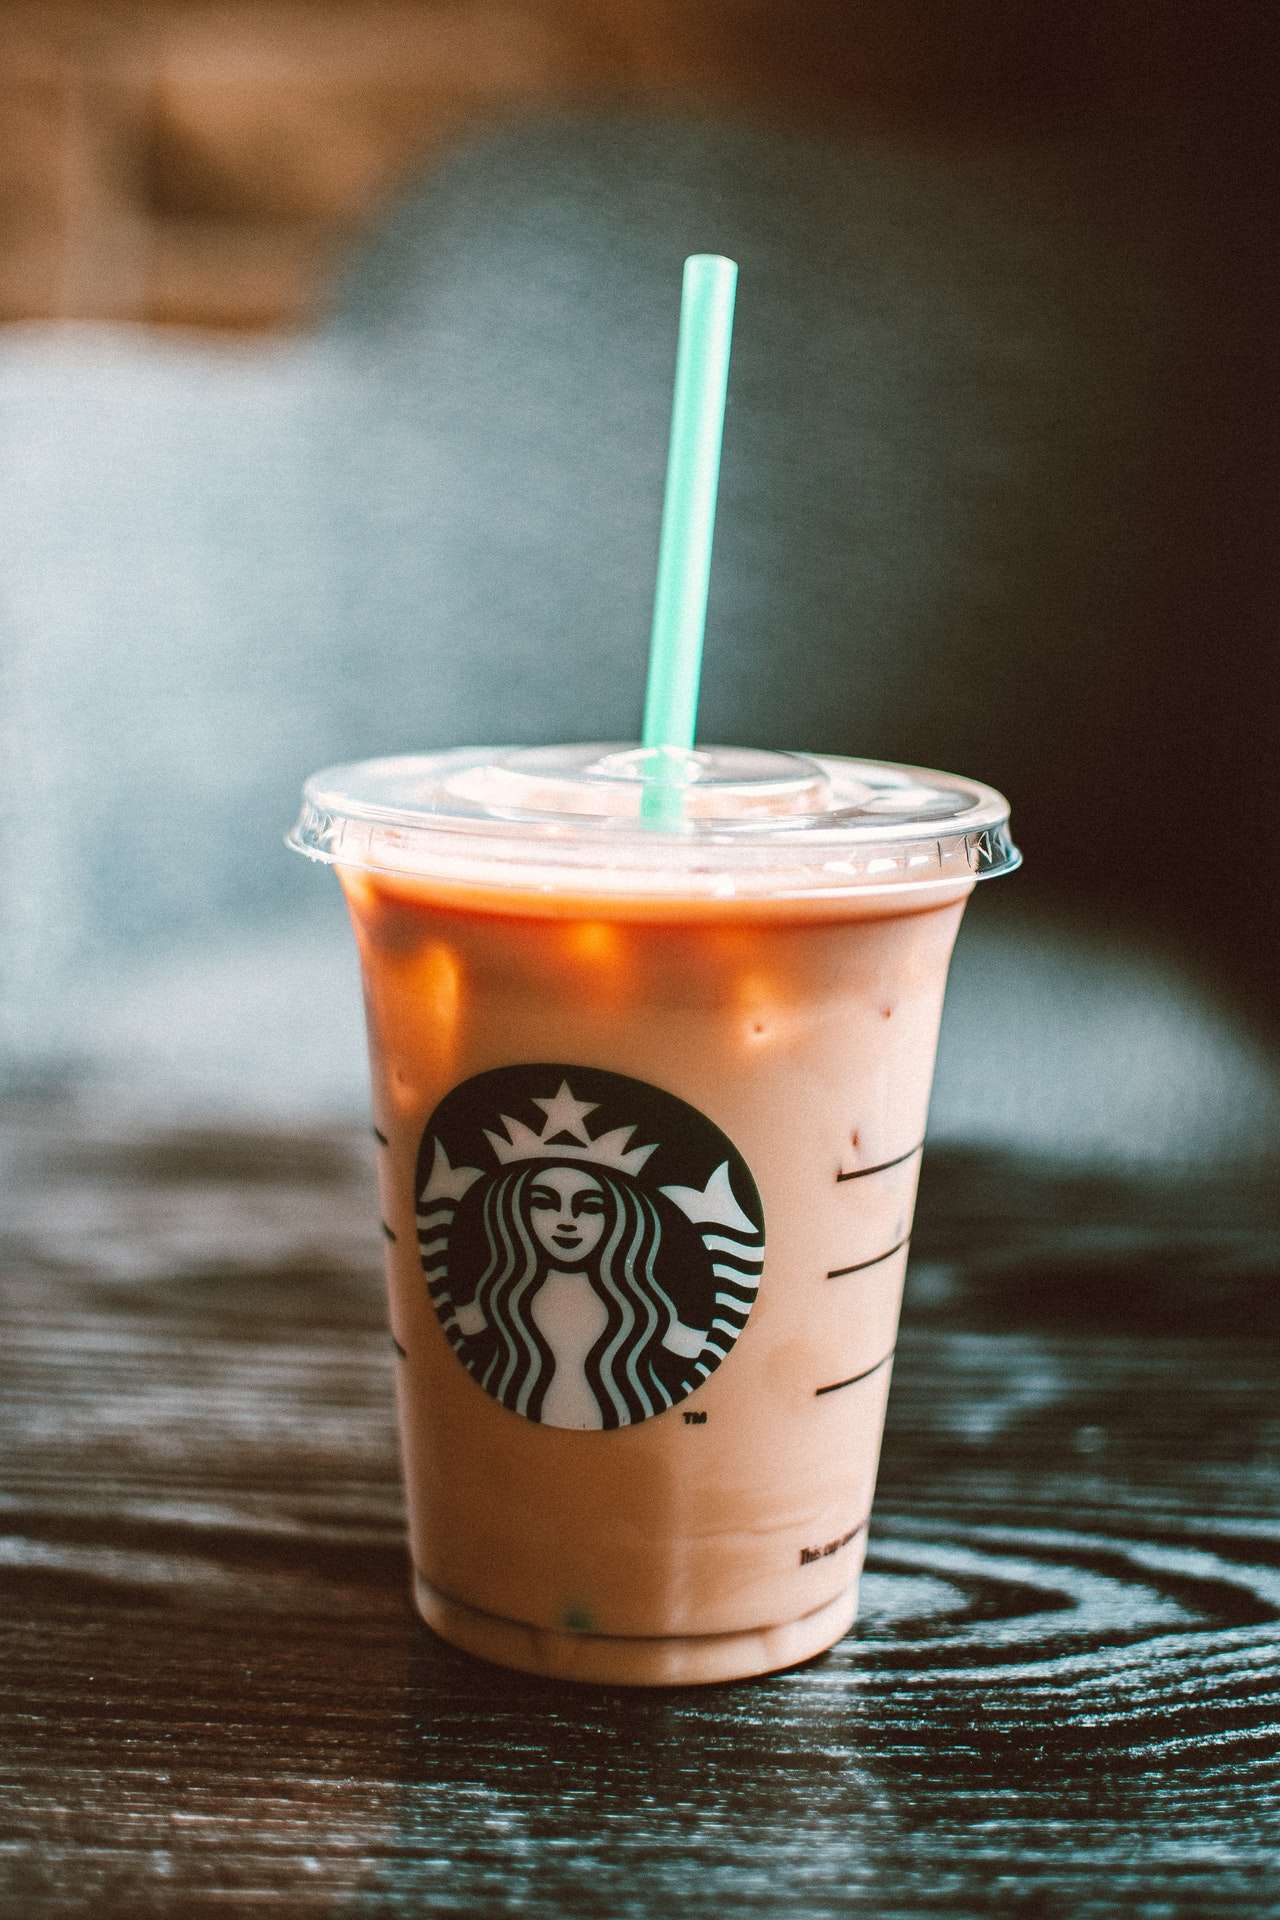 Milk Tea At Starbucks? We show you how to order it.